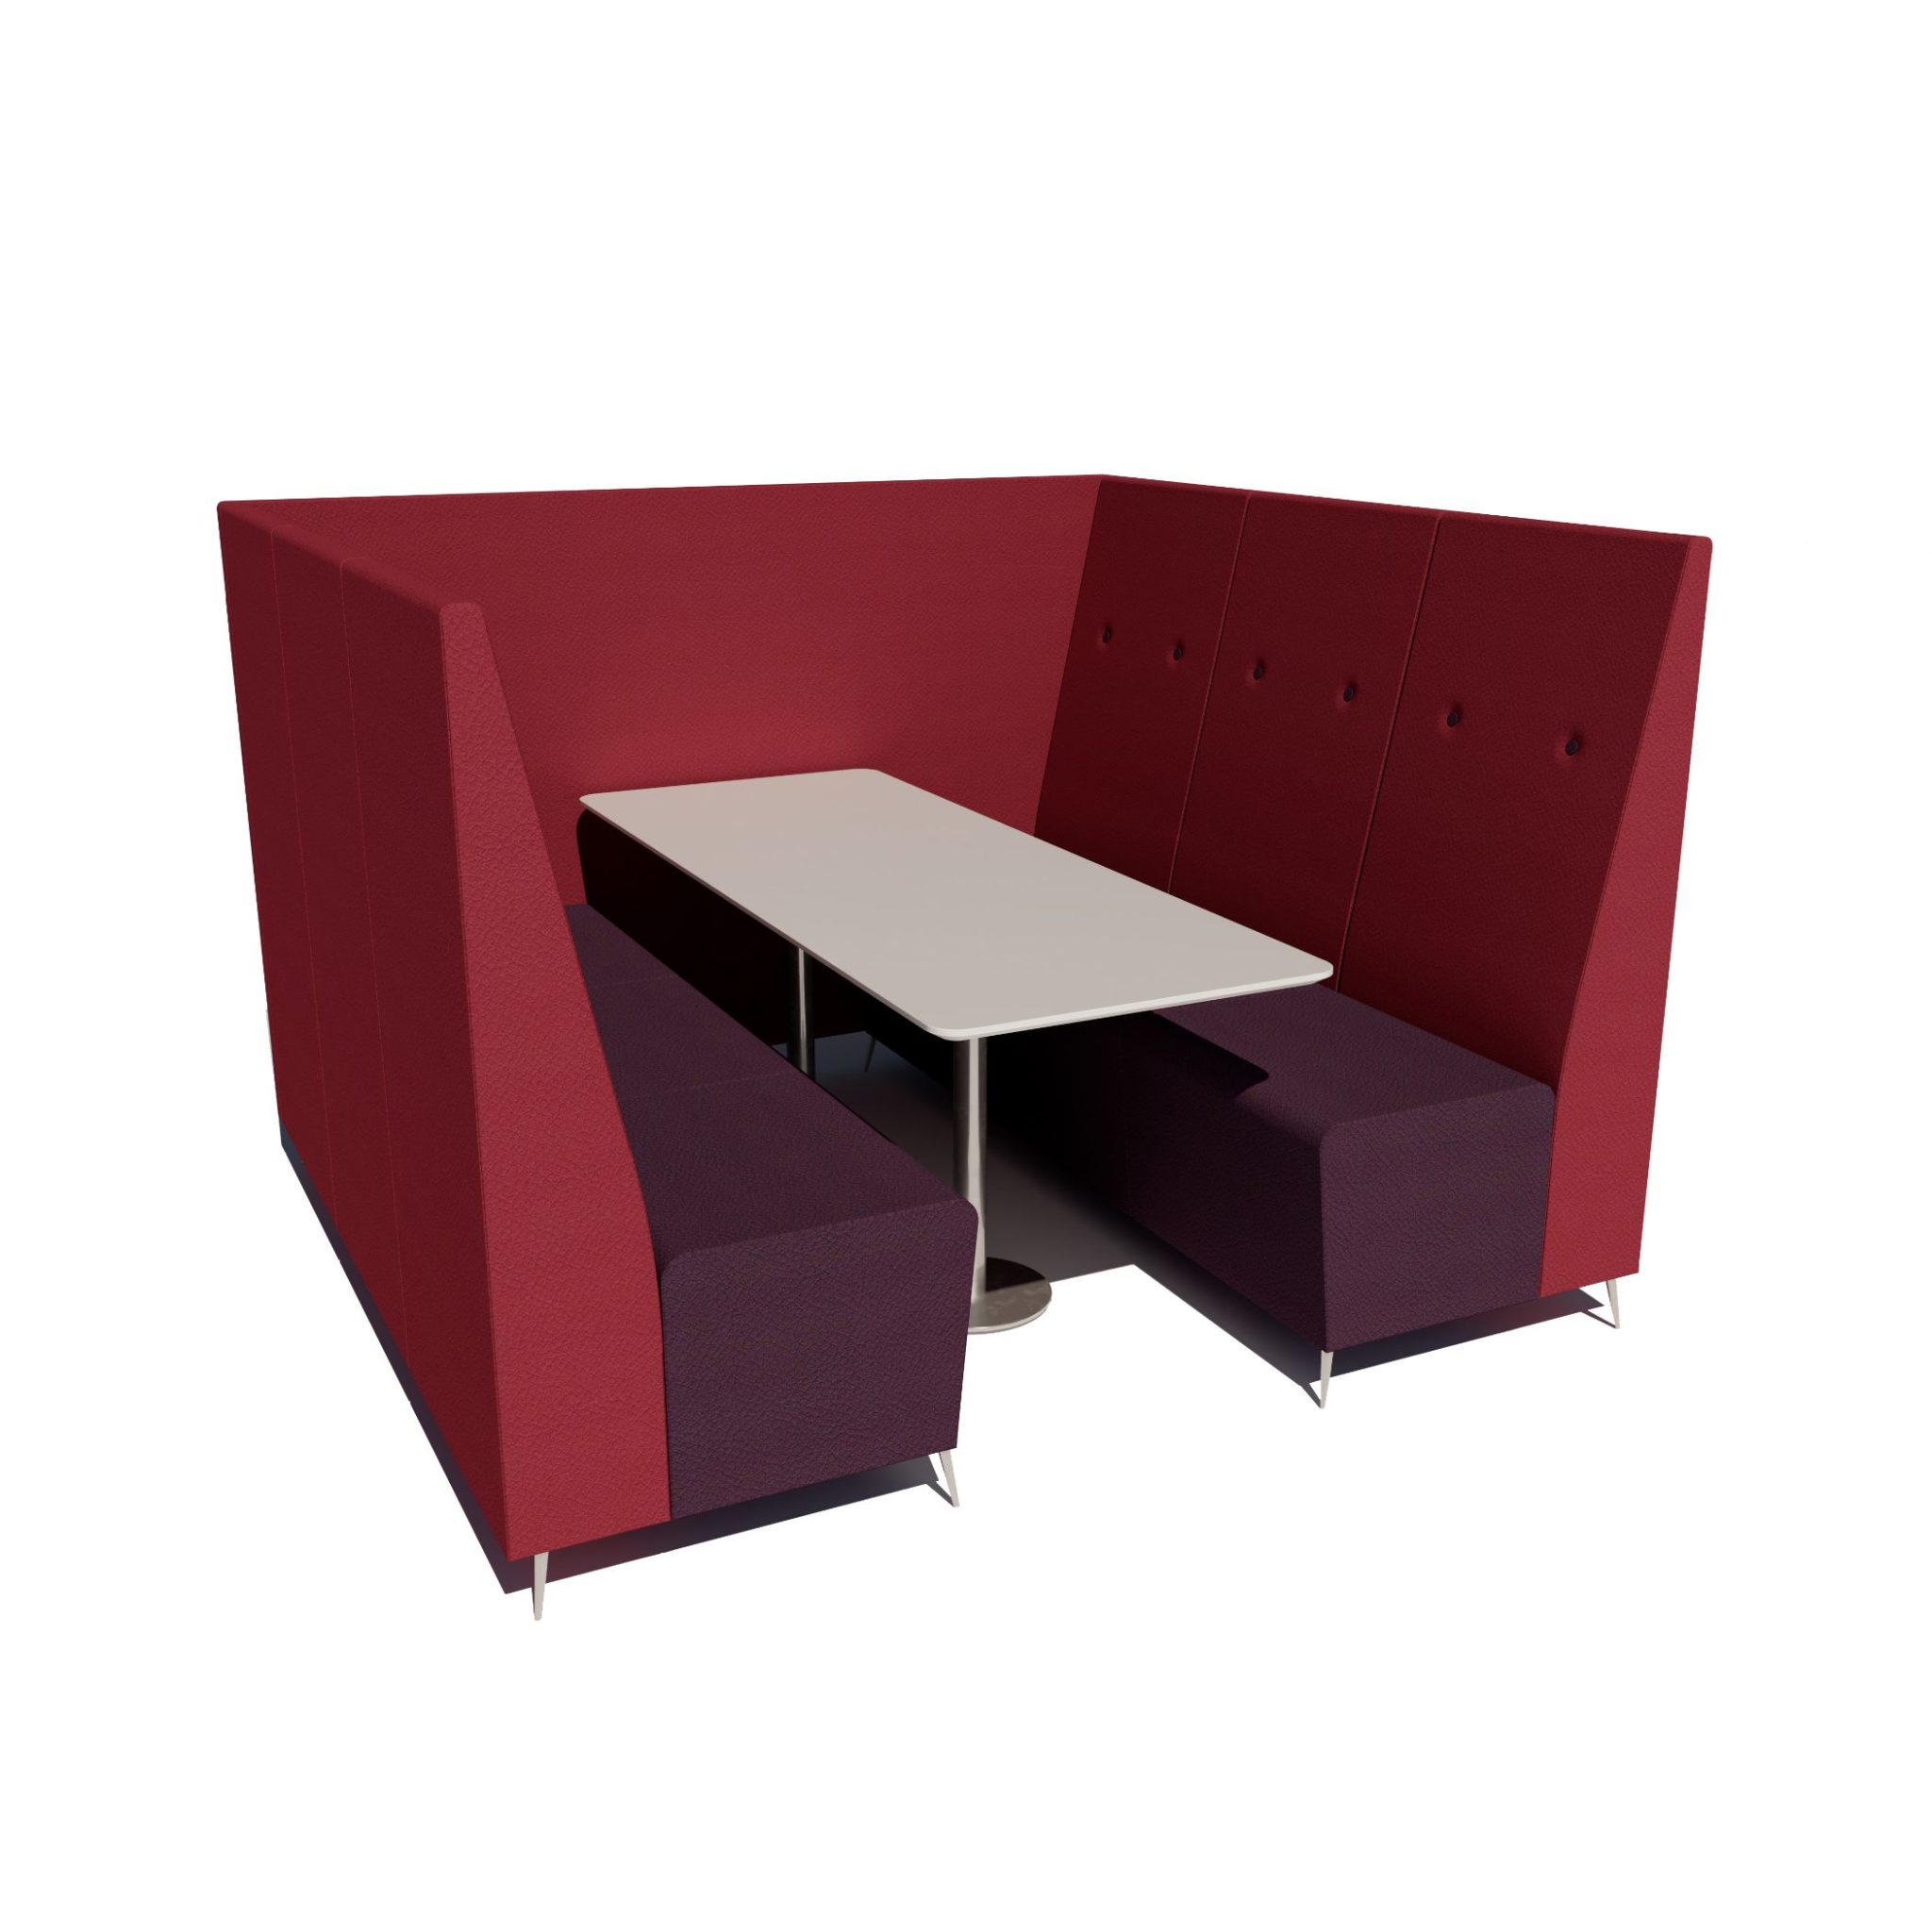 six person banquette seating unit with a link panel and an EDT 6, MFC finish table and a stainless steel column leg